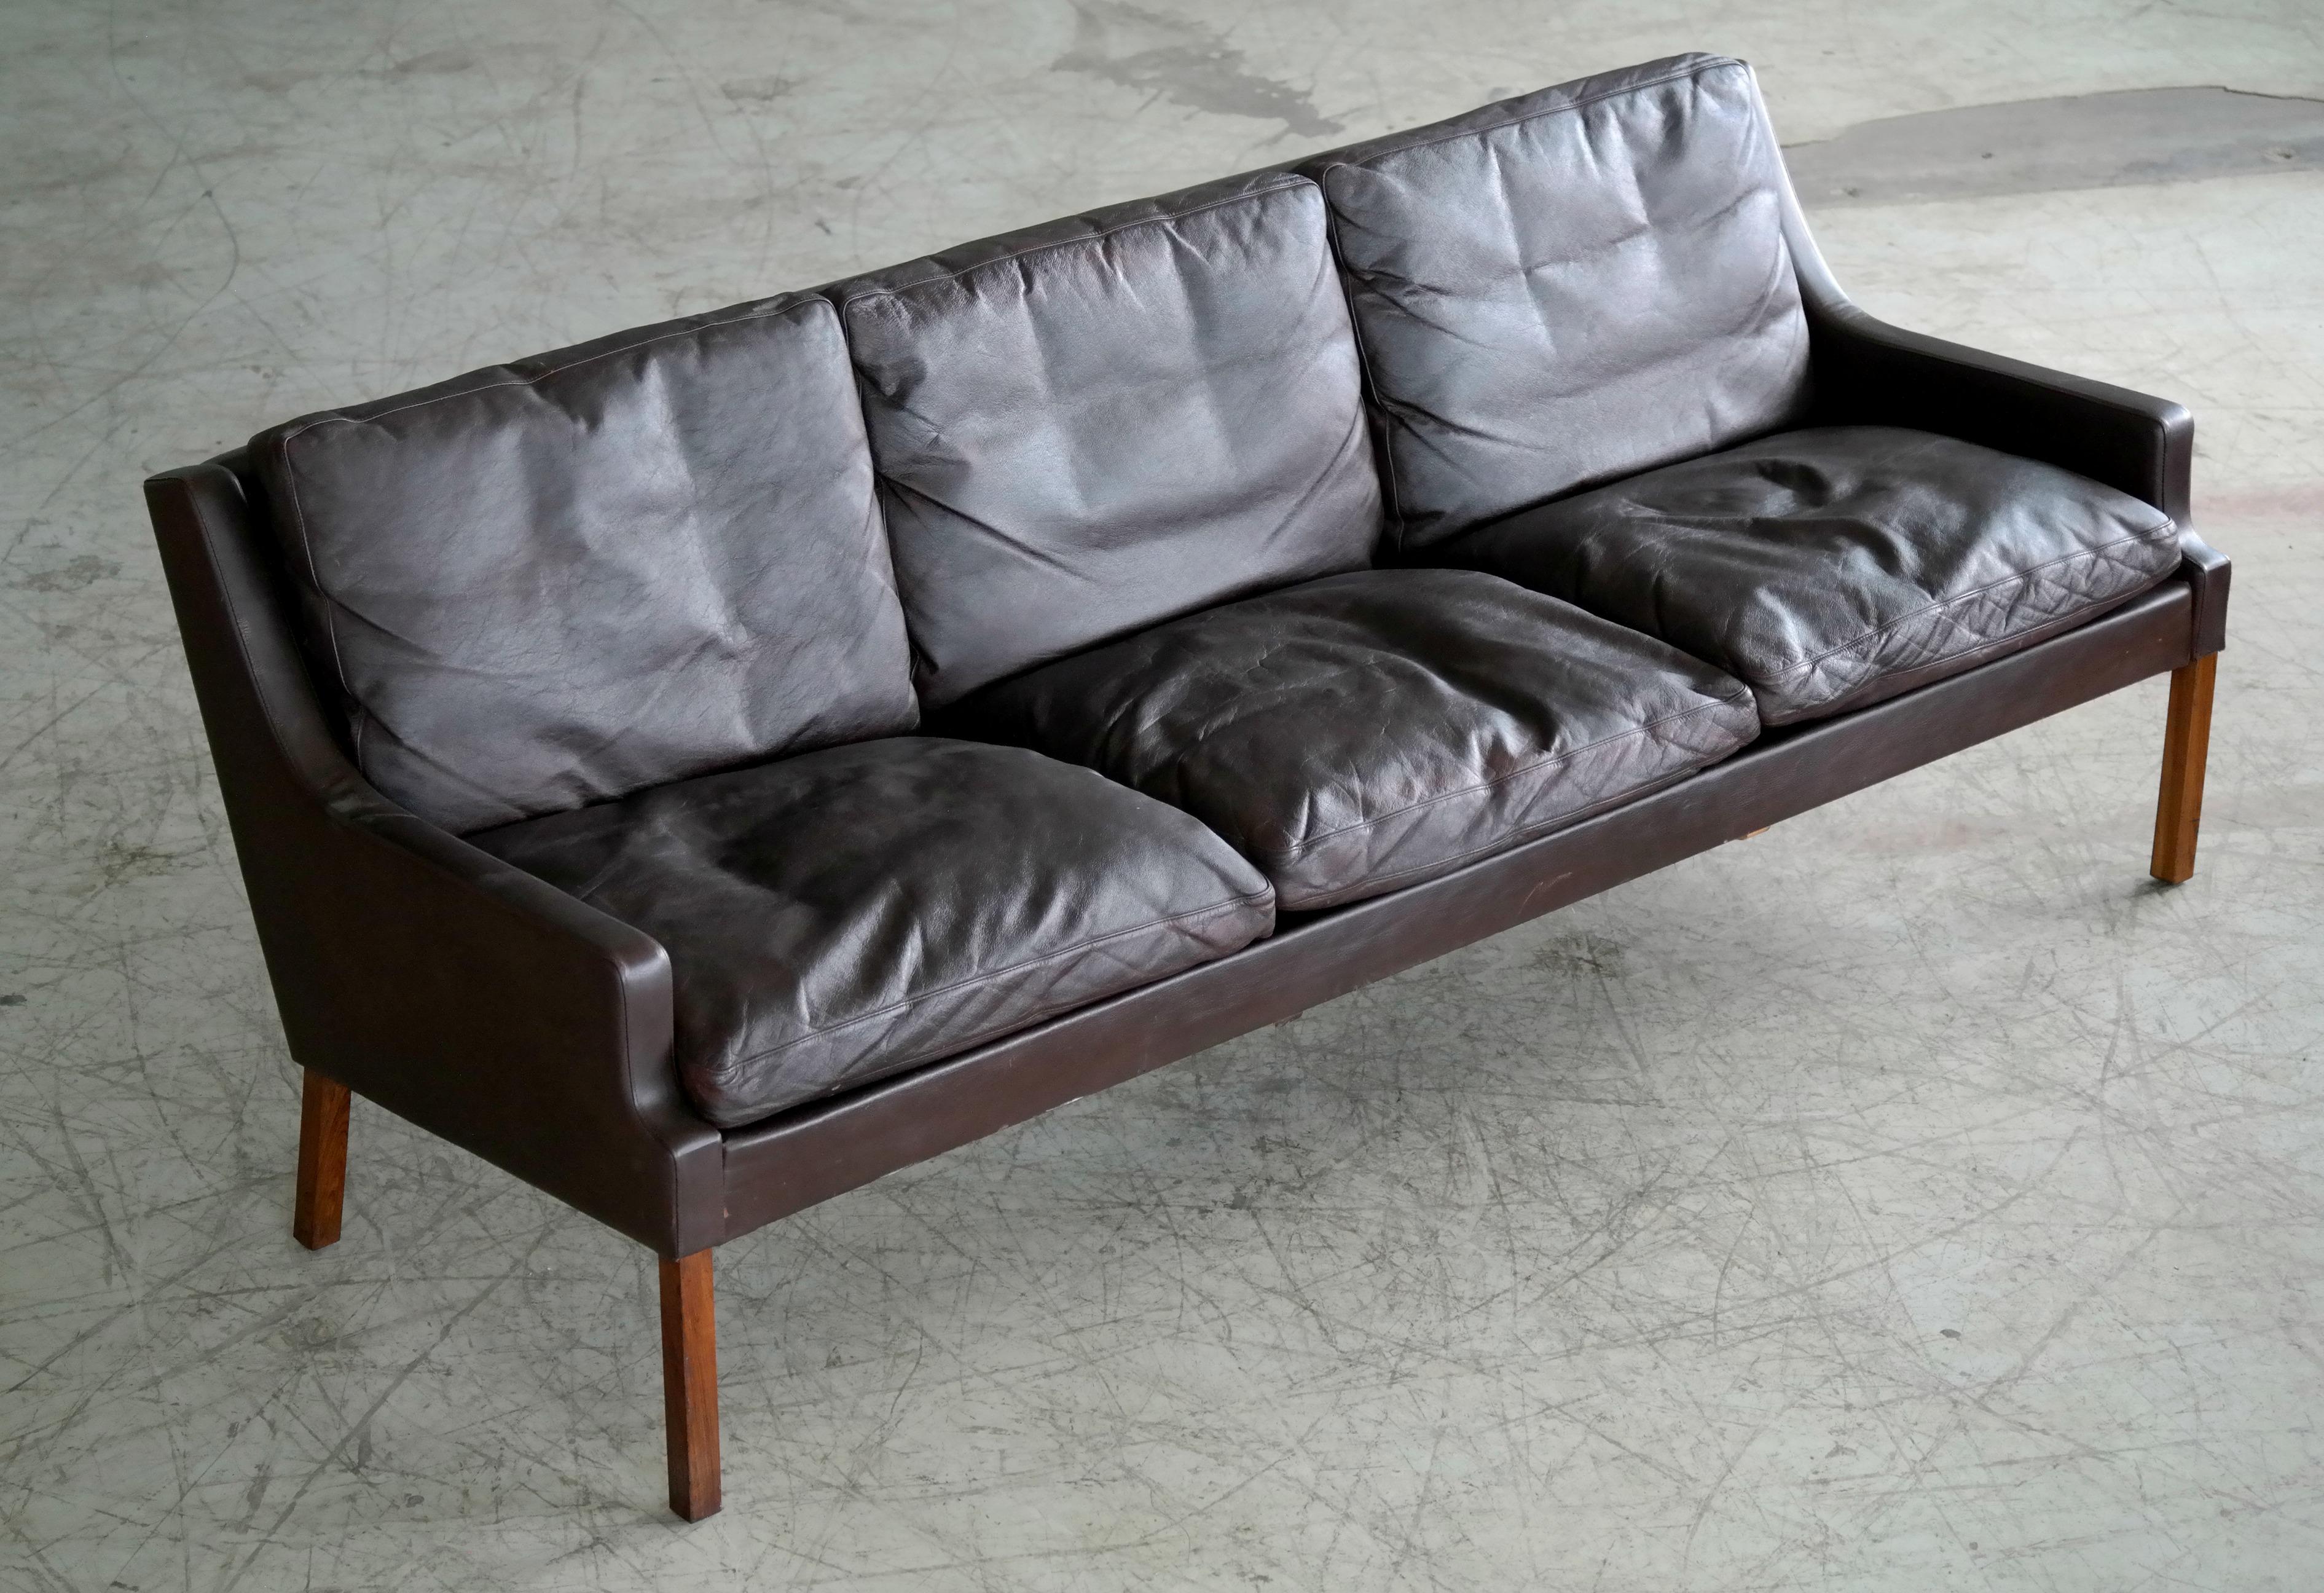 Classic Danish midcentury sofa by Georg Thams from the late 1960s. Slim beautiful silhouette in the style of Hans Olsen's famous designs raised on tall rosewood legs and with down filled cushions wrapped in espresso colored leather. Great patina and